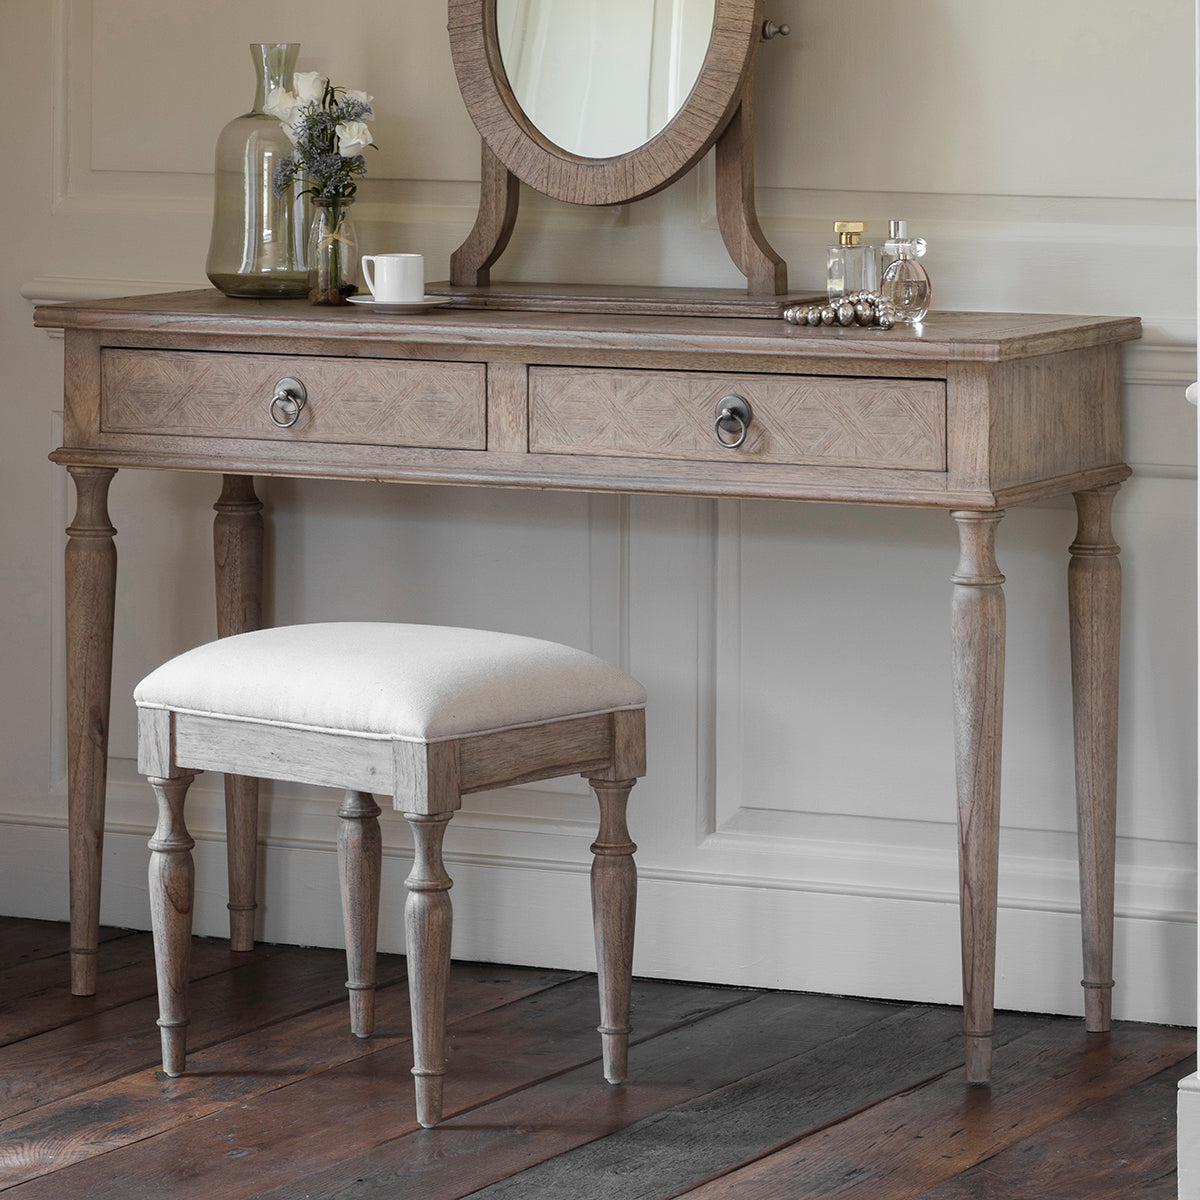 A Belsford Dressing Table 1200x400x800mm with a mirror and stool for interior decor.